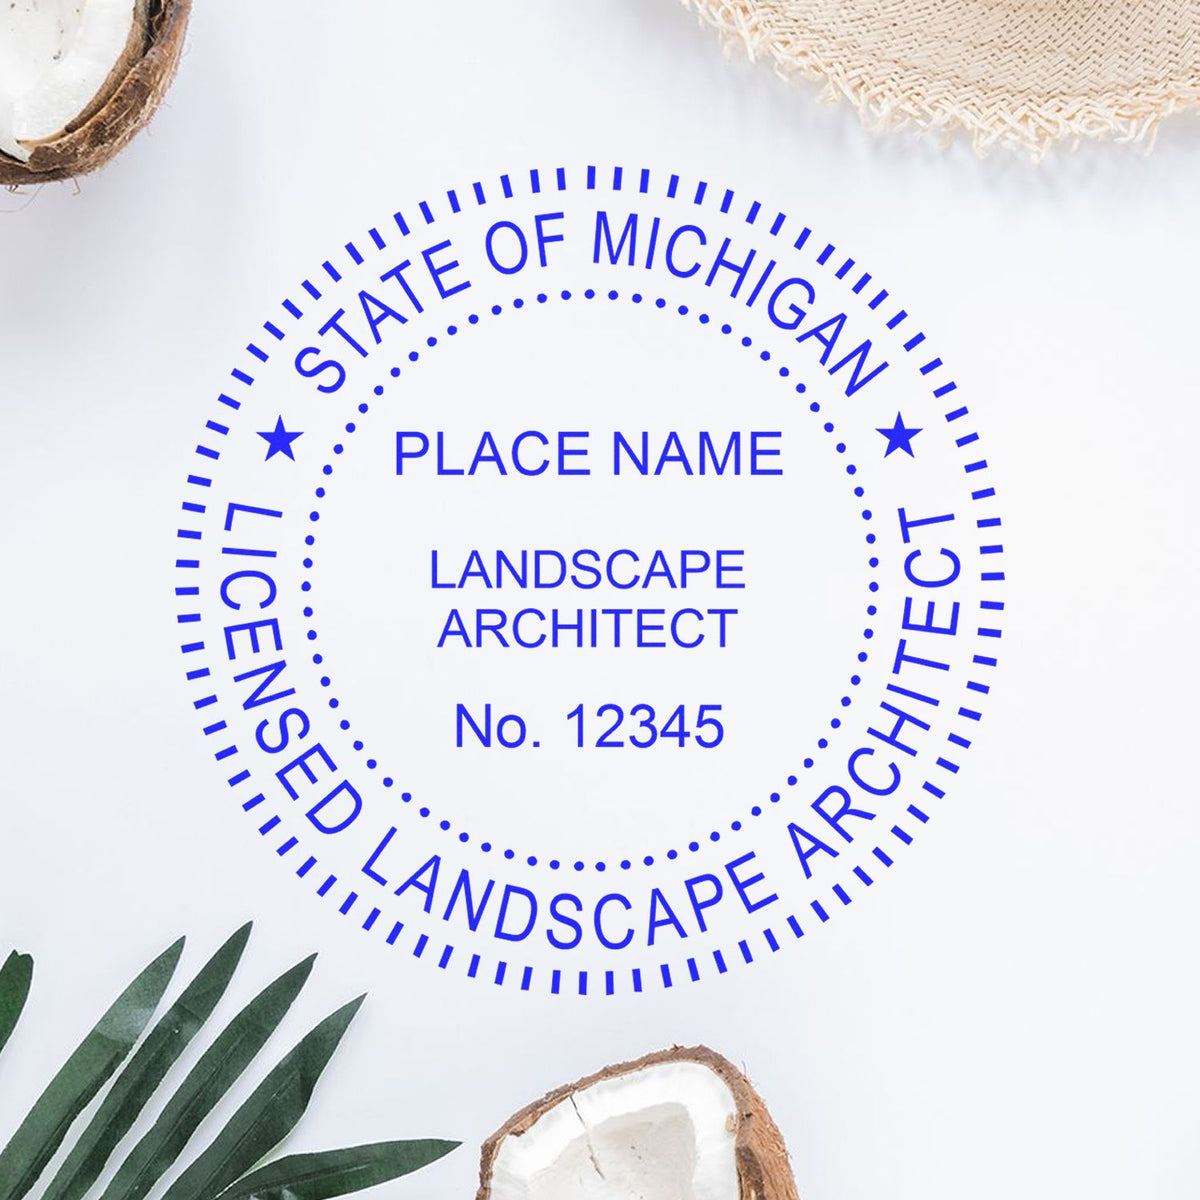 Another Example of a stamped impression of the Slim Pre-Inked Michigan Landscape Architect Seal Stamp on a piece of office paper.